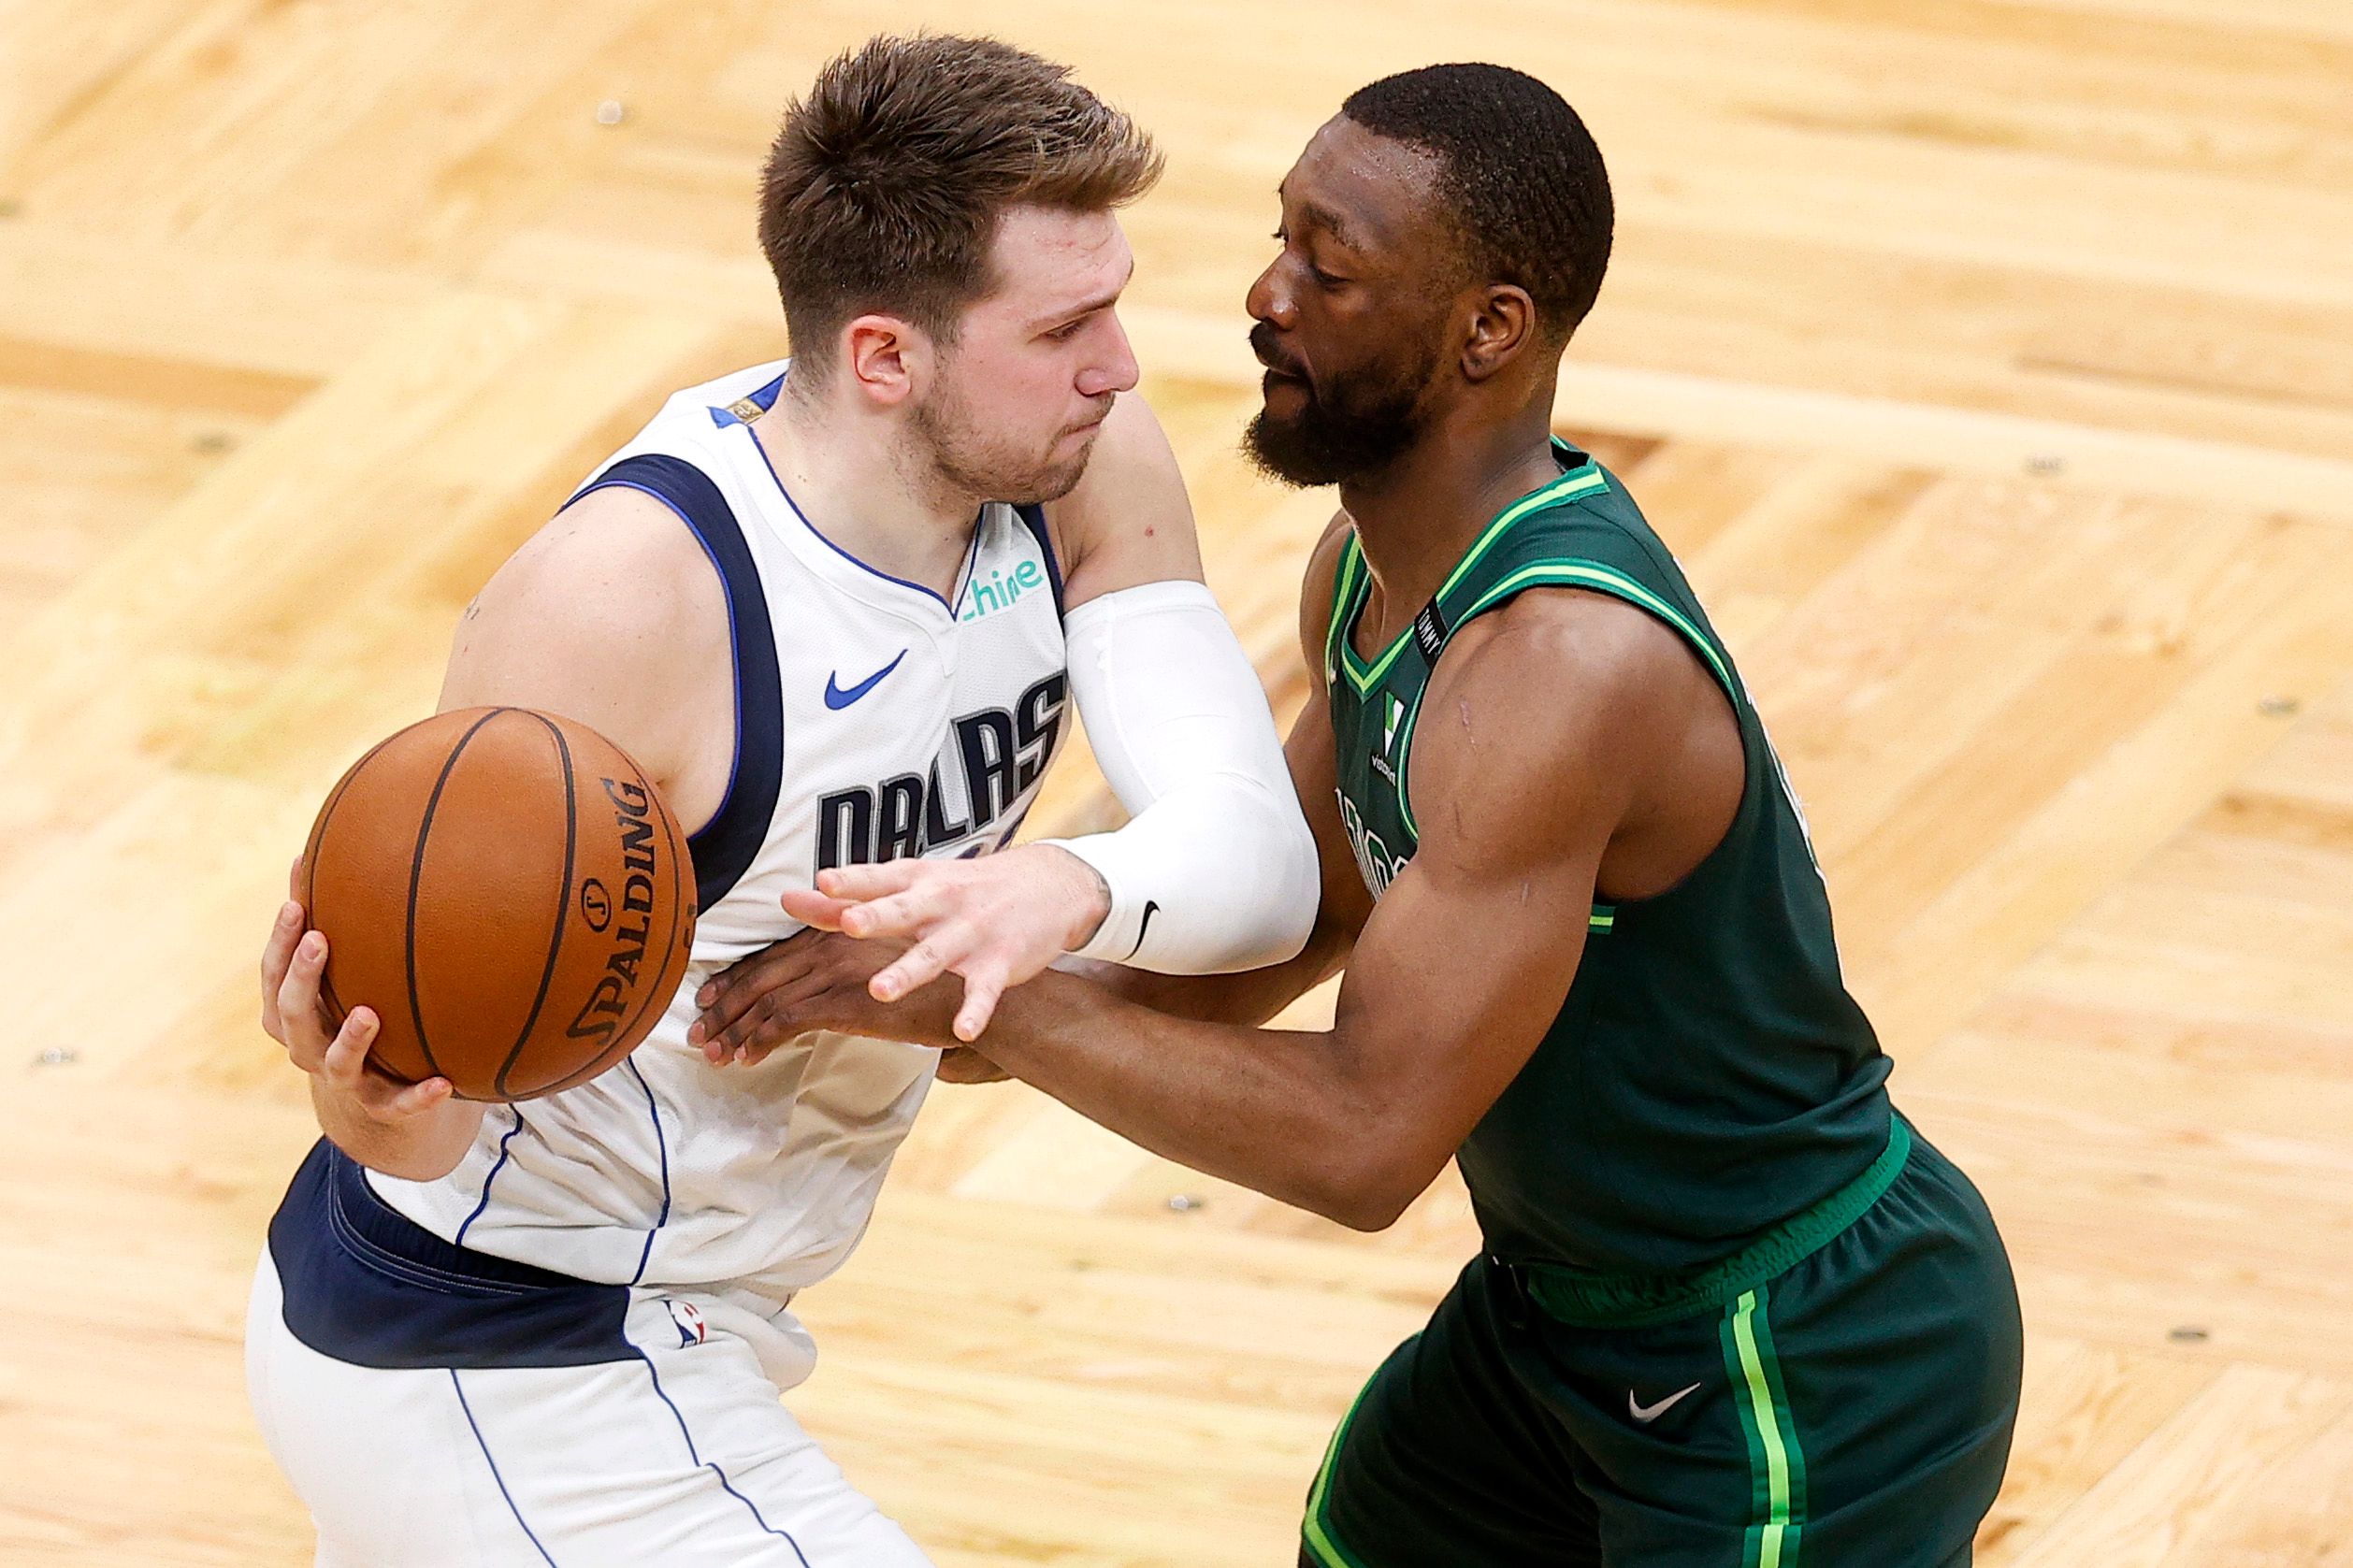 Kemba Walker trying to steal the ball from Luka Doncic